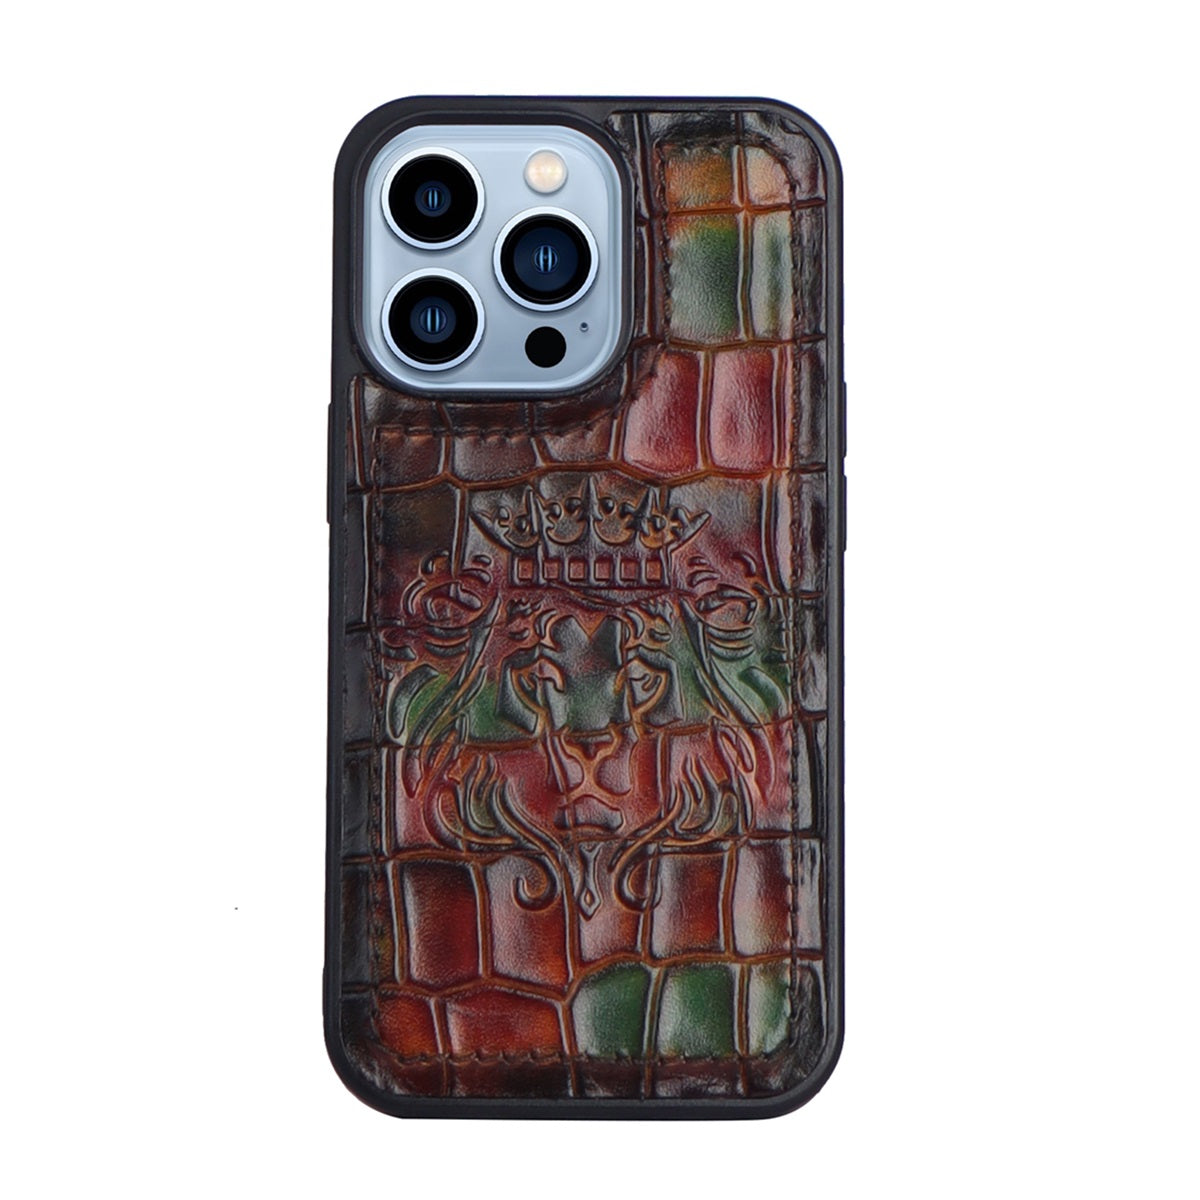 Apple iPhone Series Multi-Color Deep Cut Croco Leather Mobile Cover With Embossed Lion Logo By Brune & Bareskin